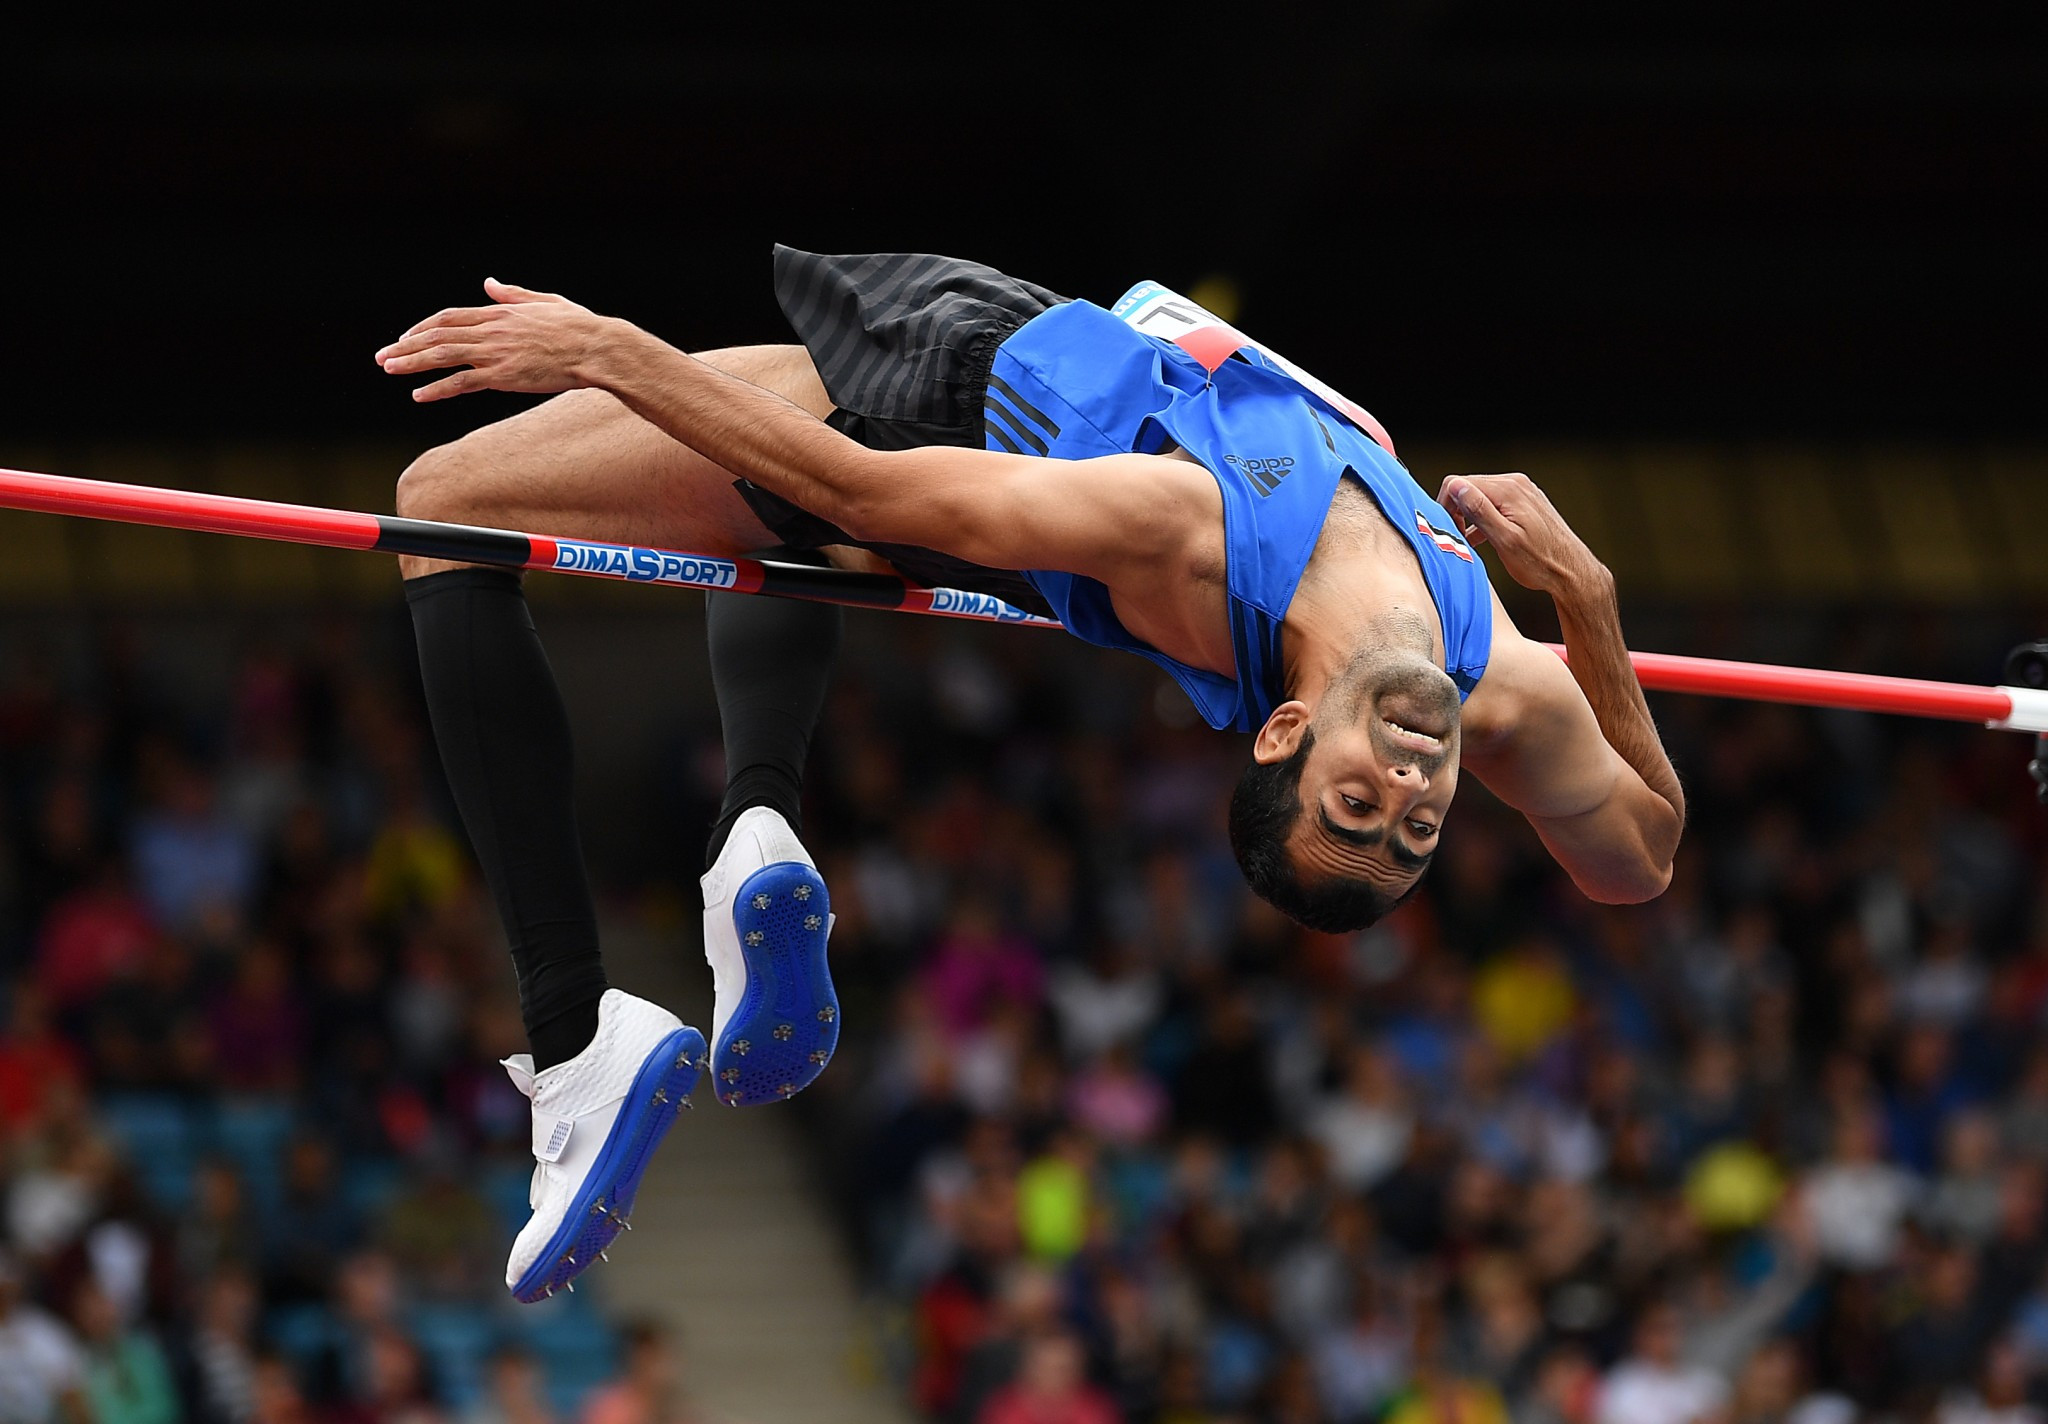 Majededdin Ghazal won high jump bronze for Syria at the IAAF World Championships in London this month ©Getty Images